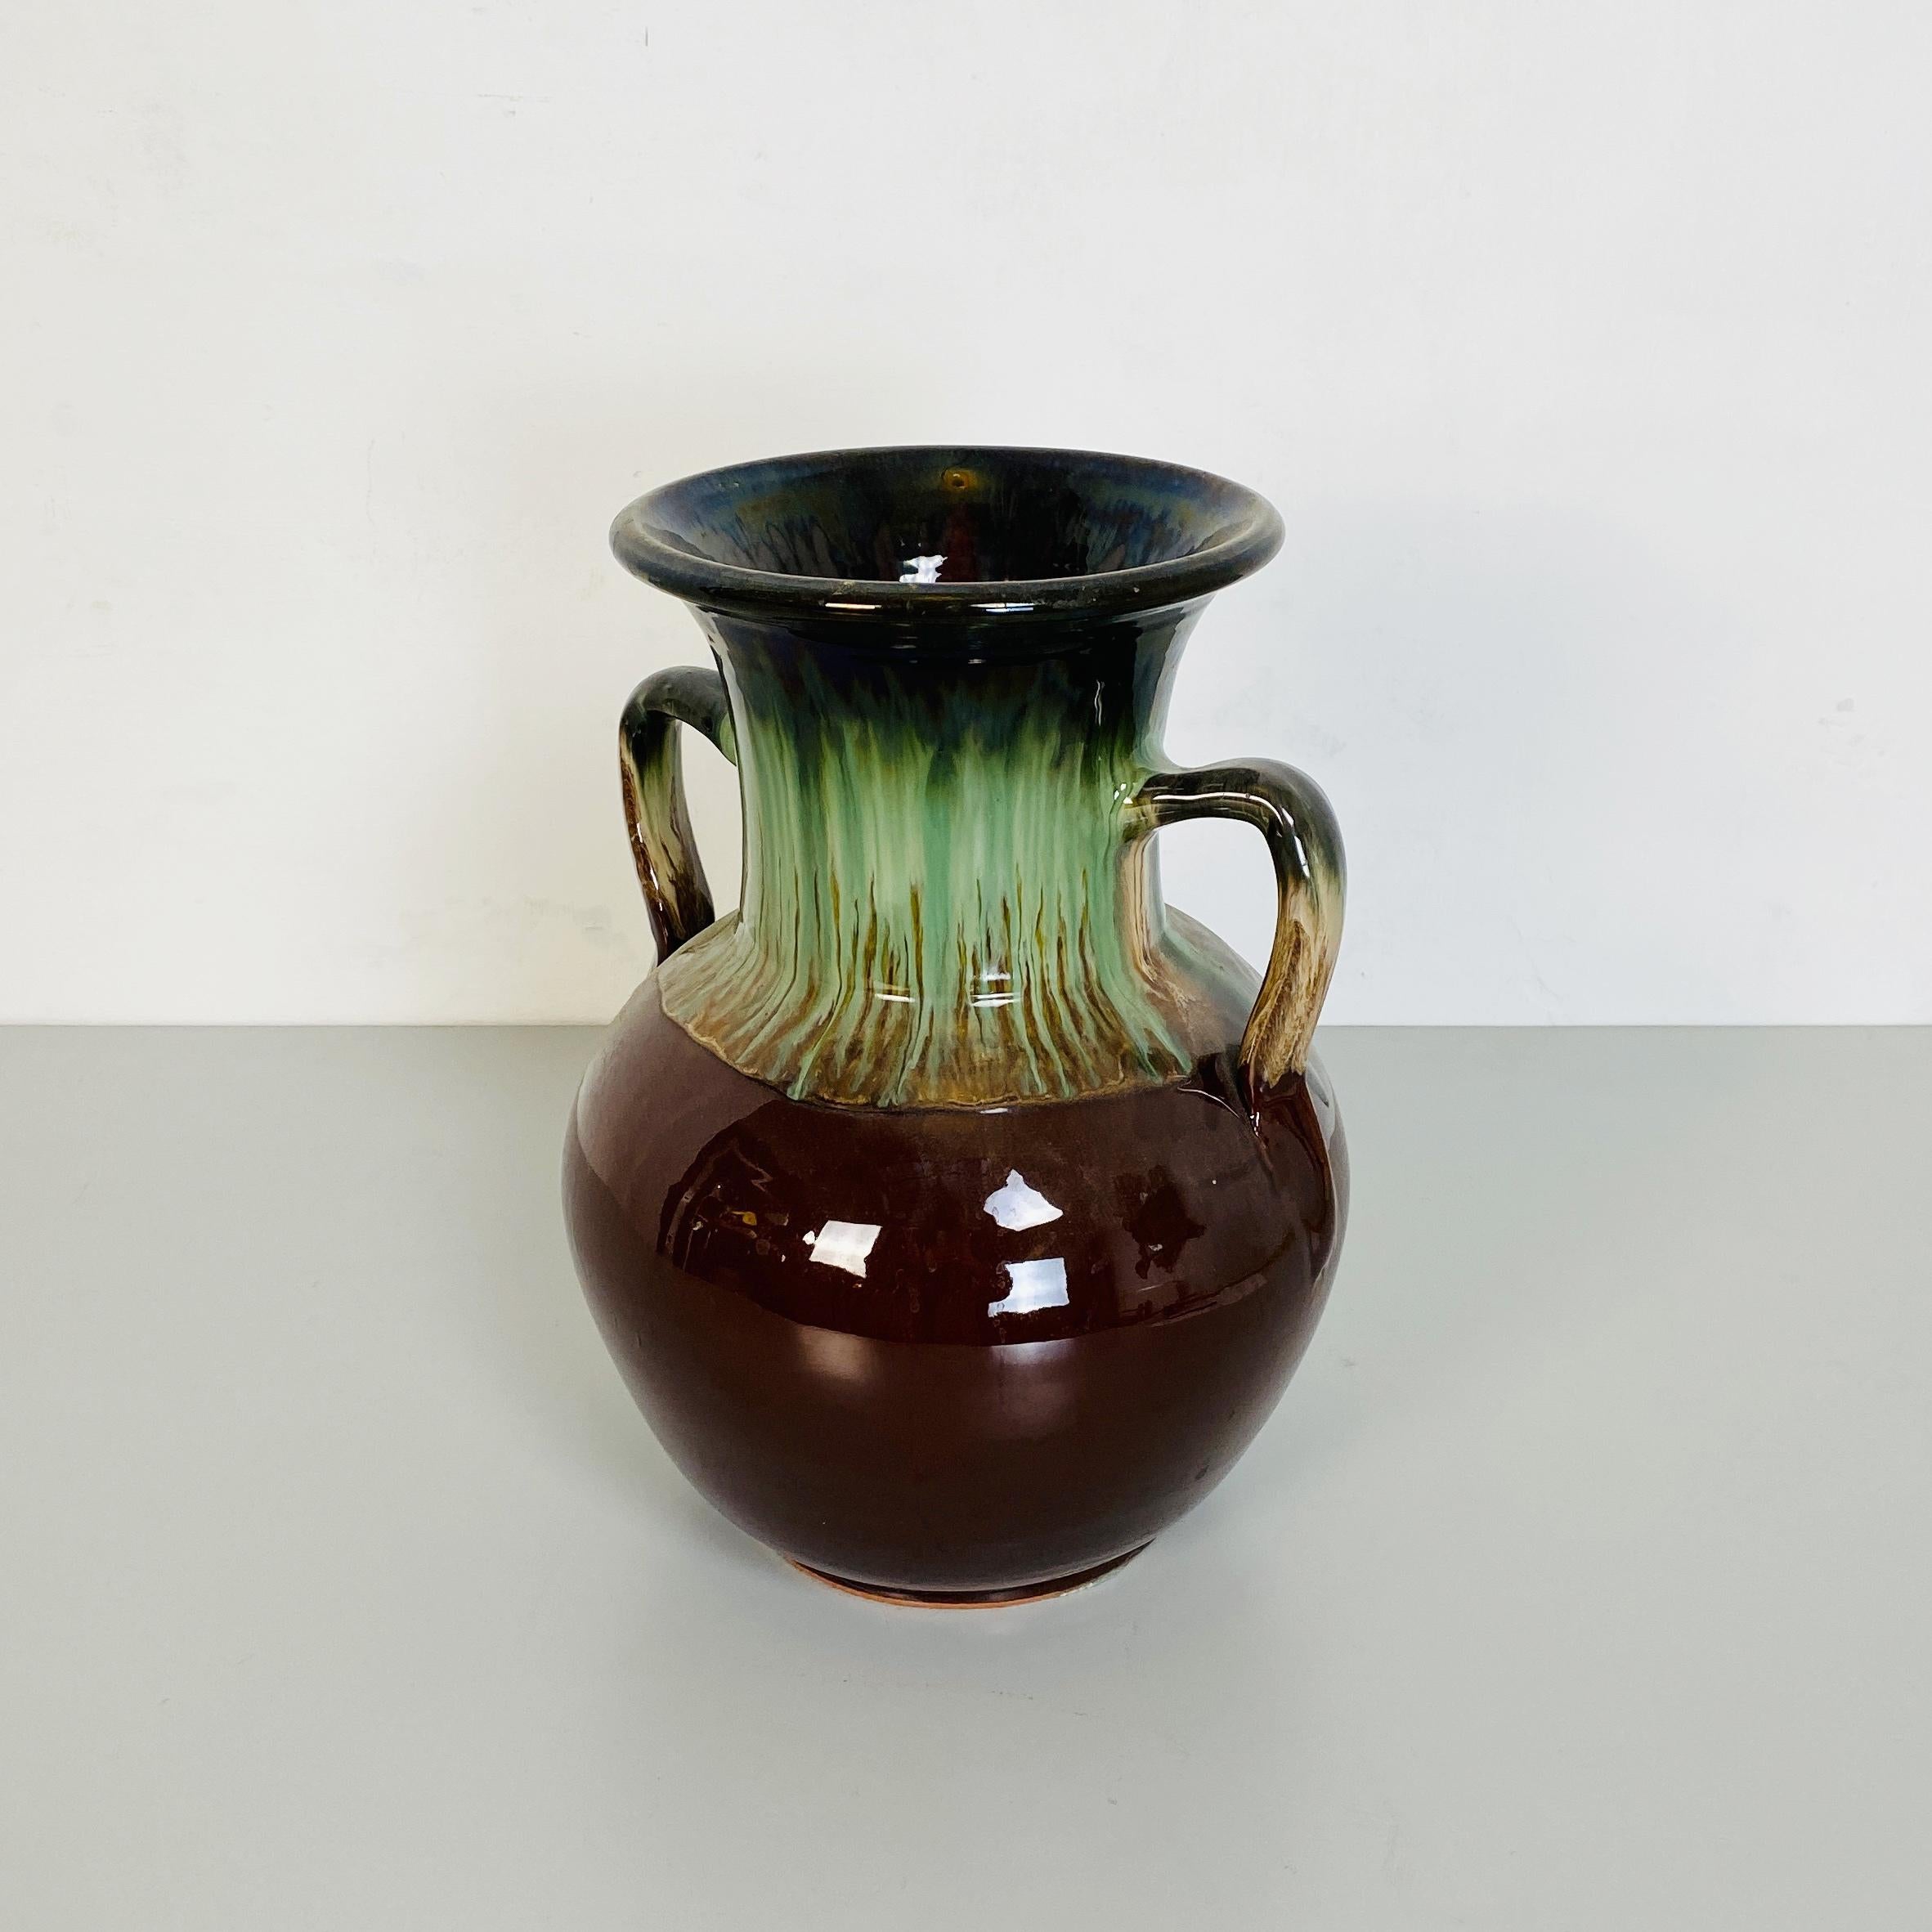 Italian Mid-Century Modern Green and Brown Glazed Ceramic Amphora, 1960s For Sale 2